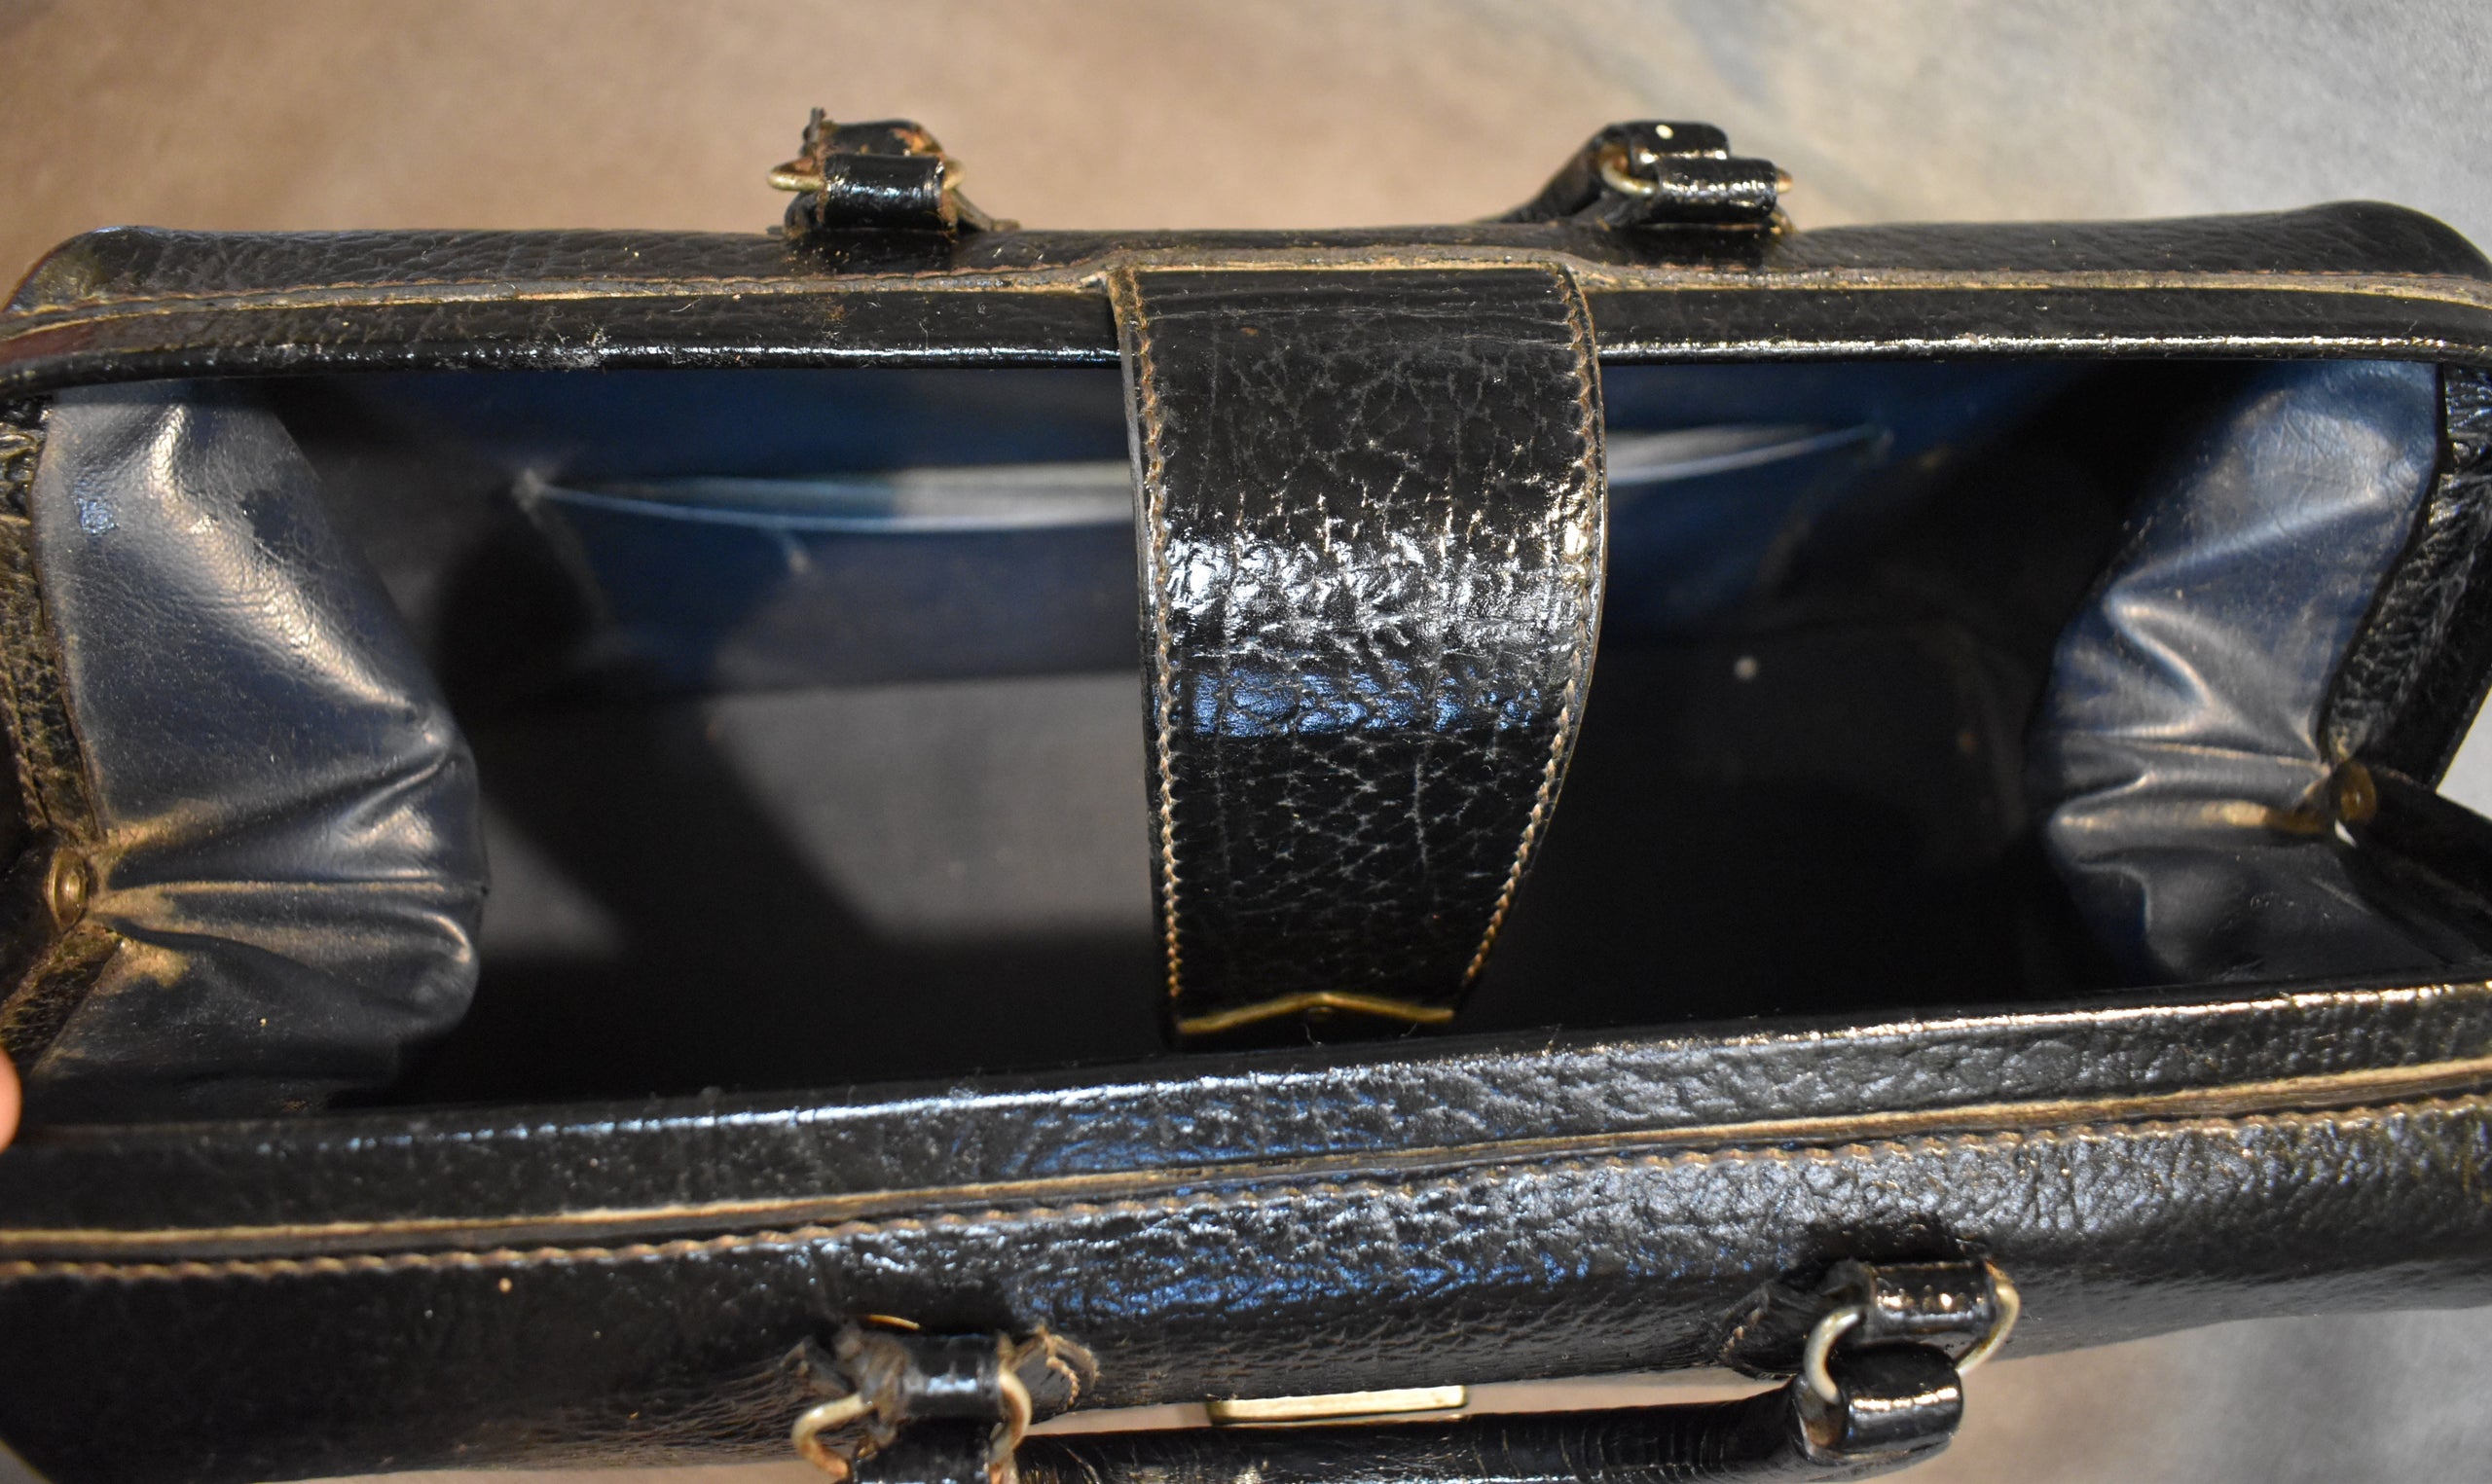 1920's Black Cowhide Leather Doctor's Bag by Kruse